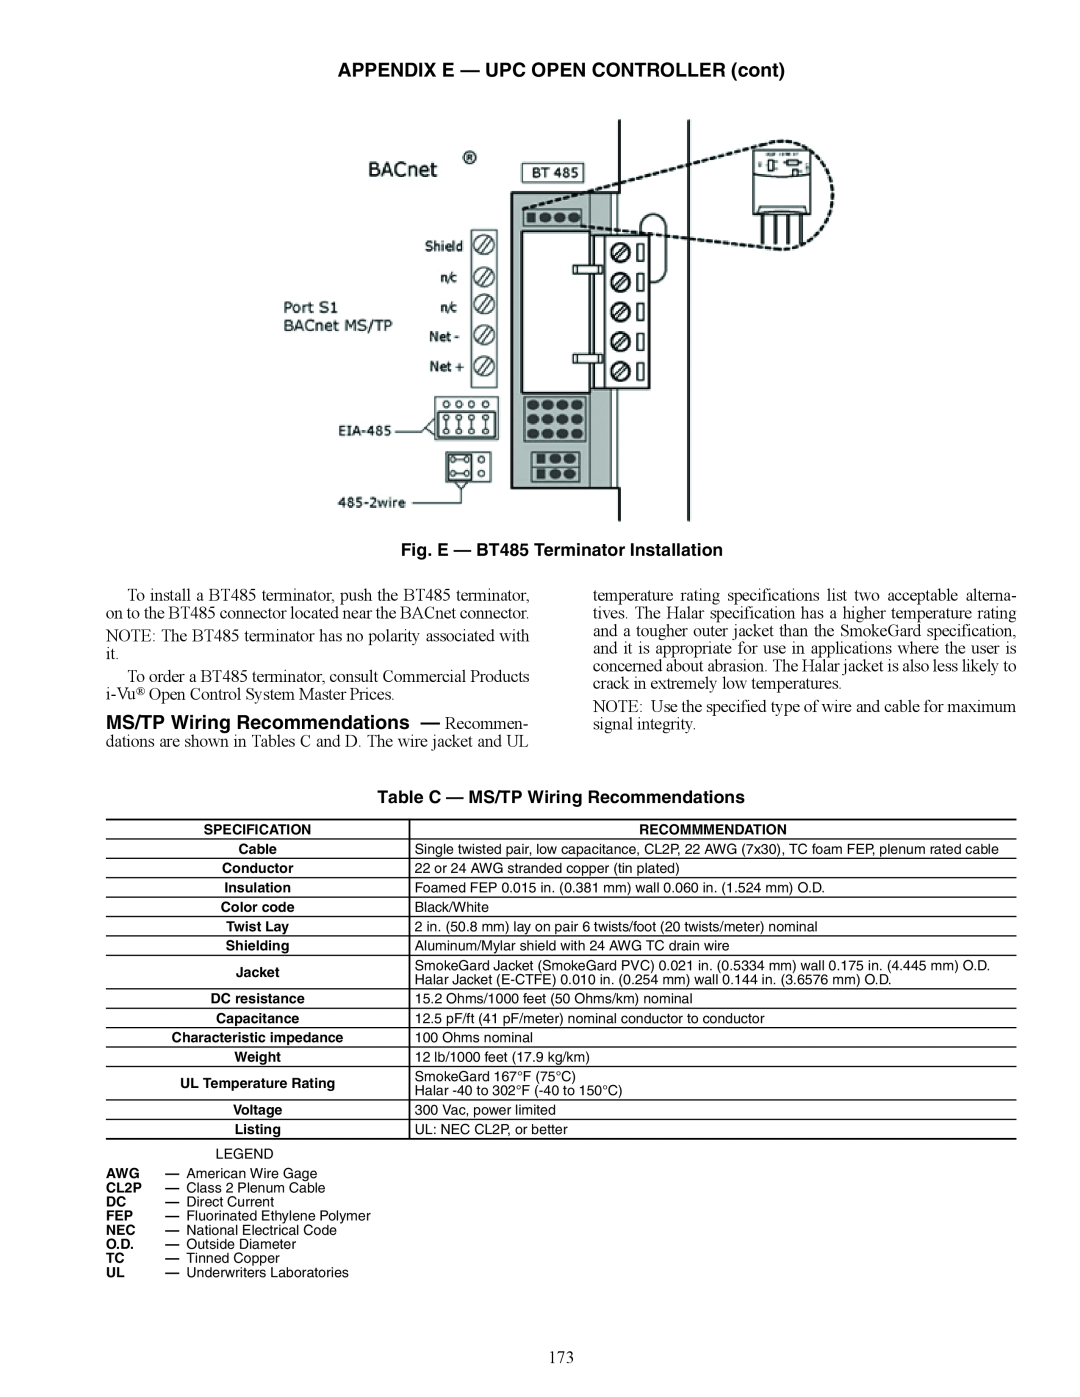 Carrier 48/50AJ specifications Fig. E — BT485 Terminator Installation, Table C — MS/TP Wiring Recommendations 